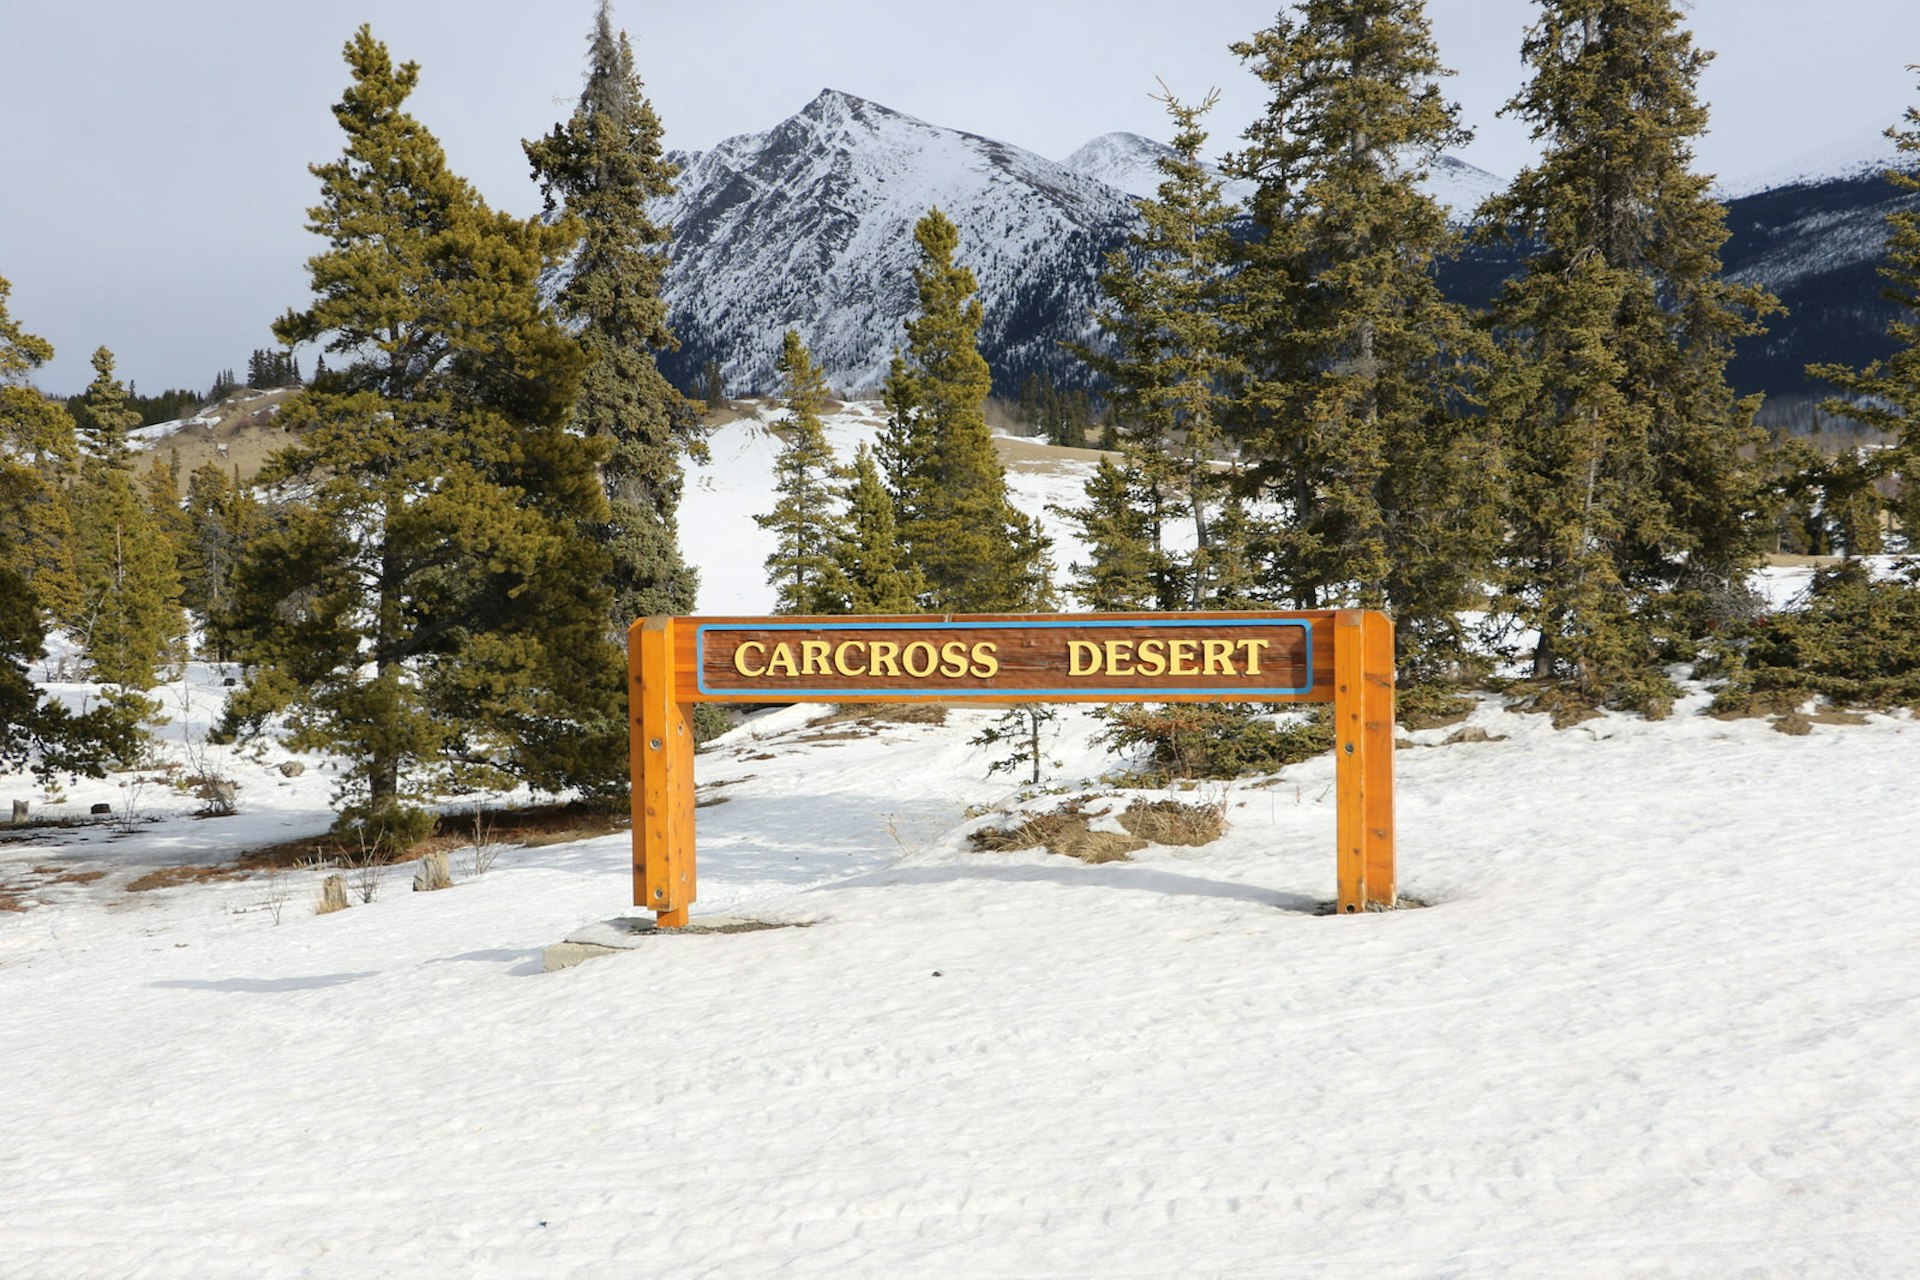 A sign reading Carcross Desert is seen in a snowbank, with alpine trees and a large mountain in the background © Mike MacEacheran / Lonely Planet